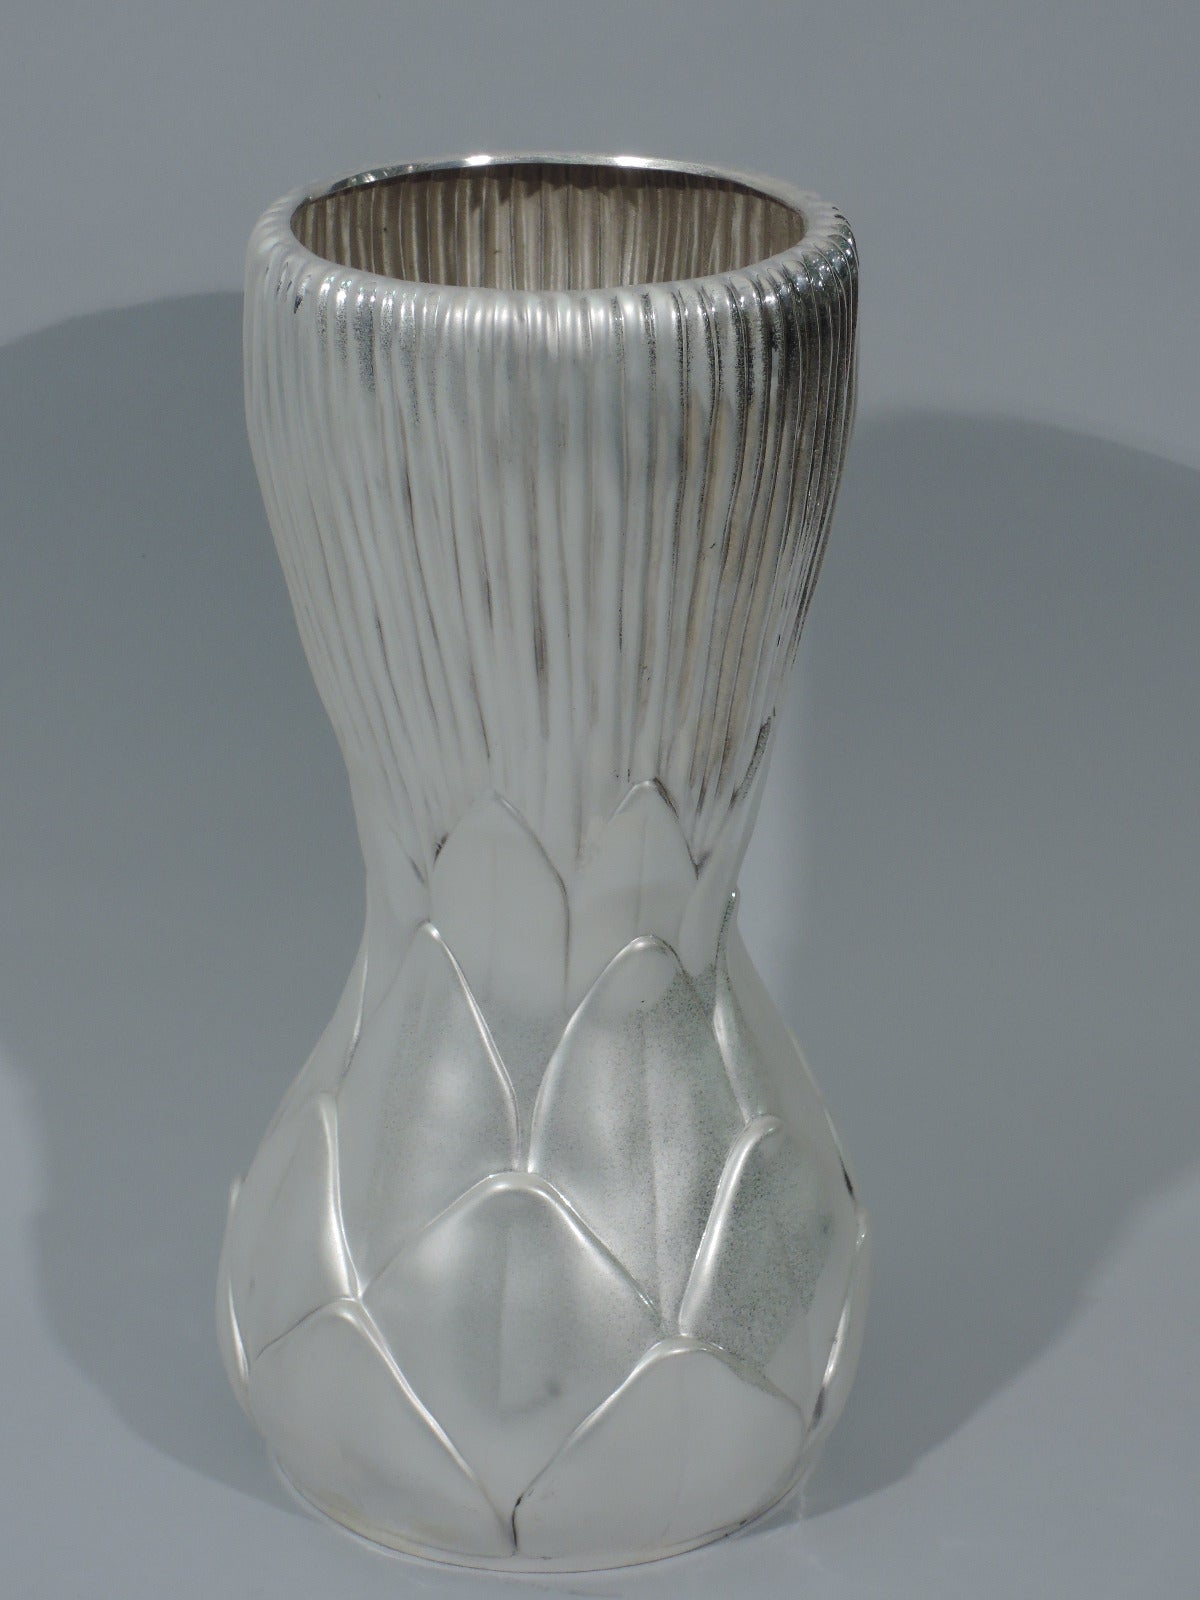 American Contemporary Tiffany Sterling Silver Vase of Aesthetic Inspiration